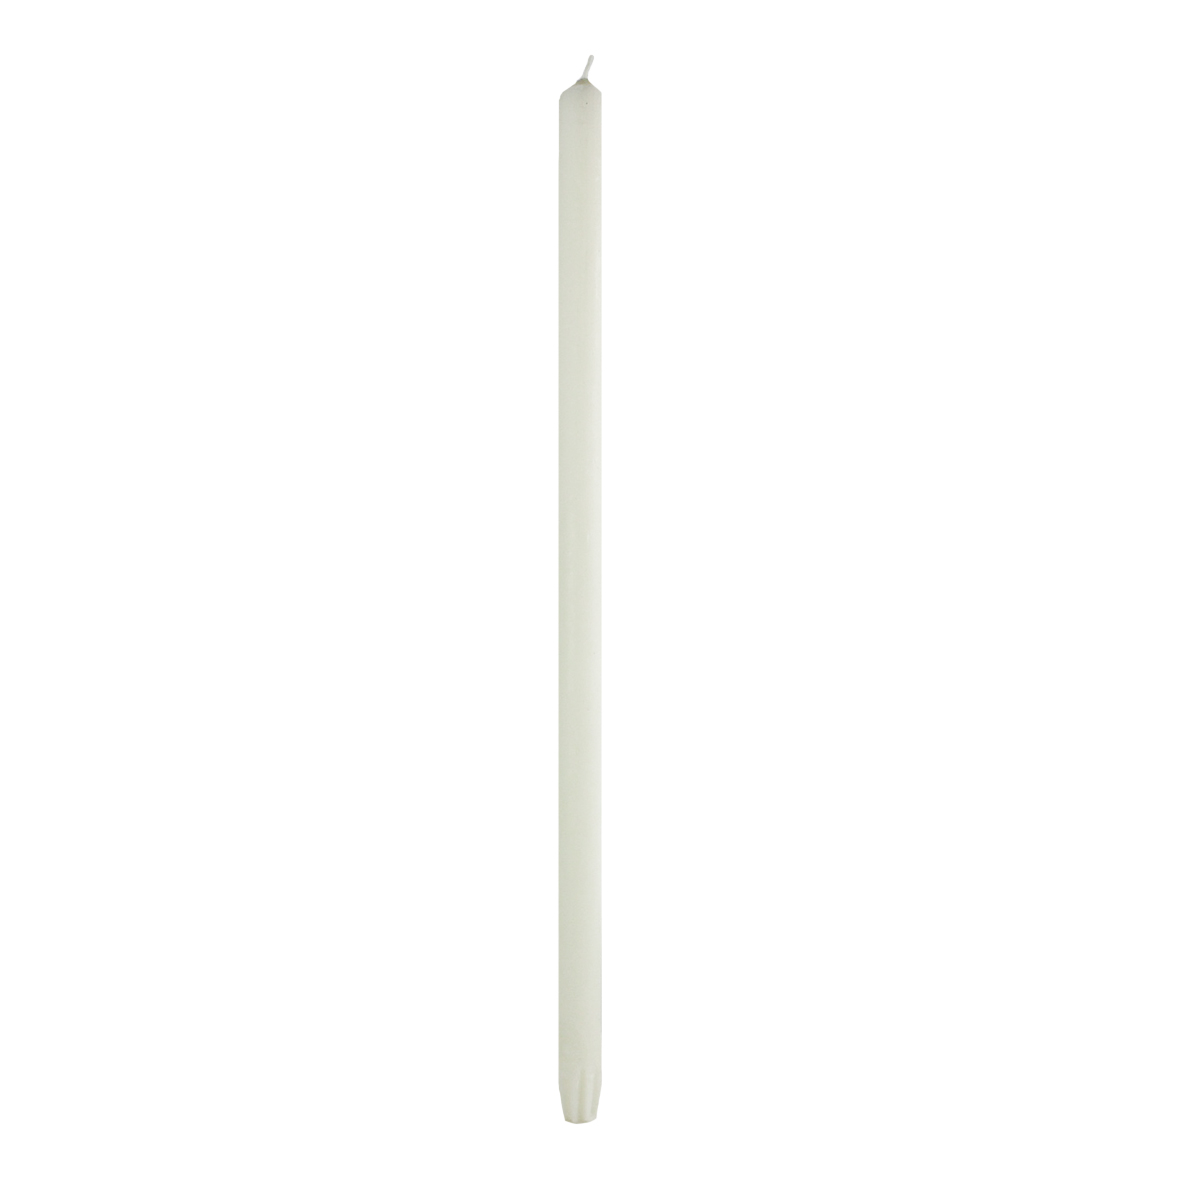 51% BEESWAX 7/8" x 17-1/4" SELF FITTING END CANDLE STICK